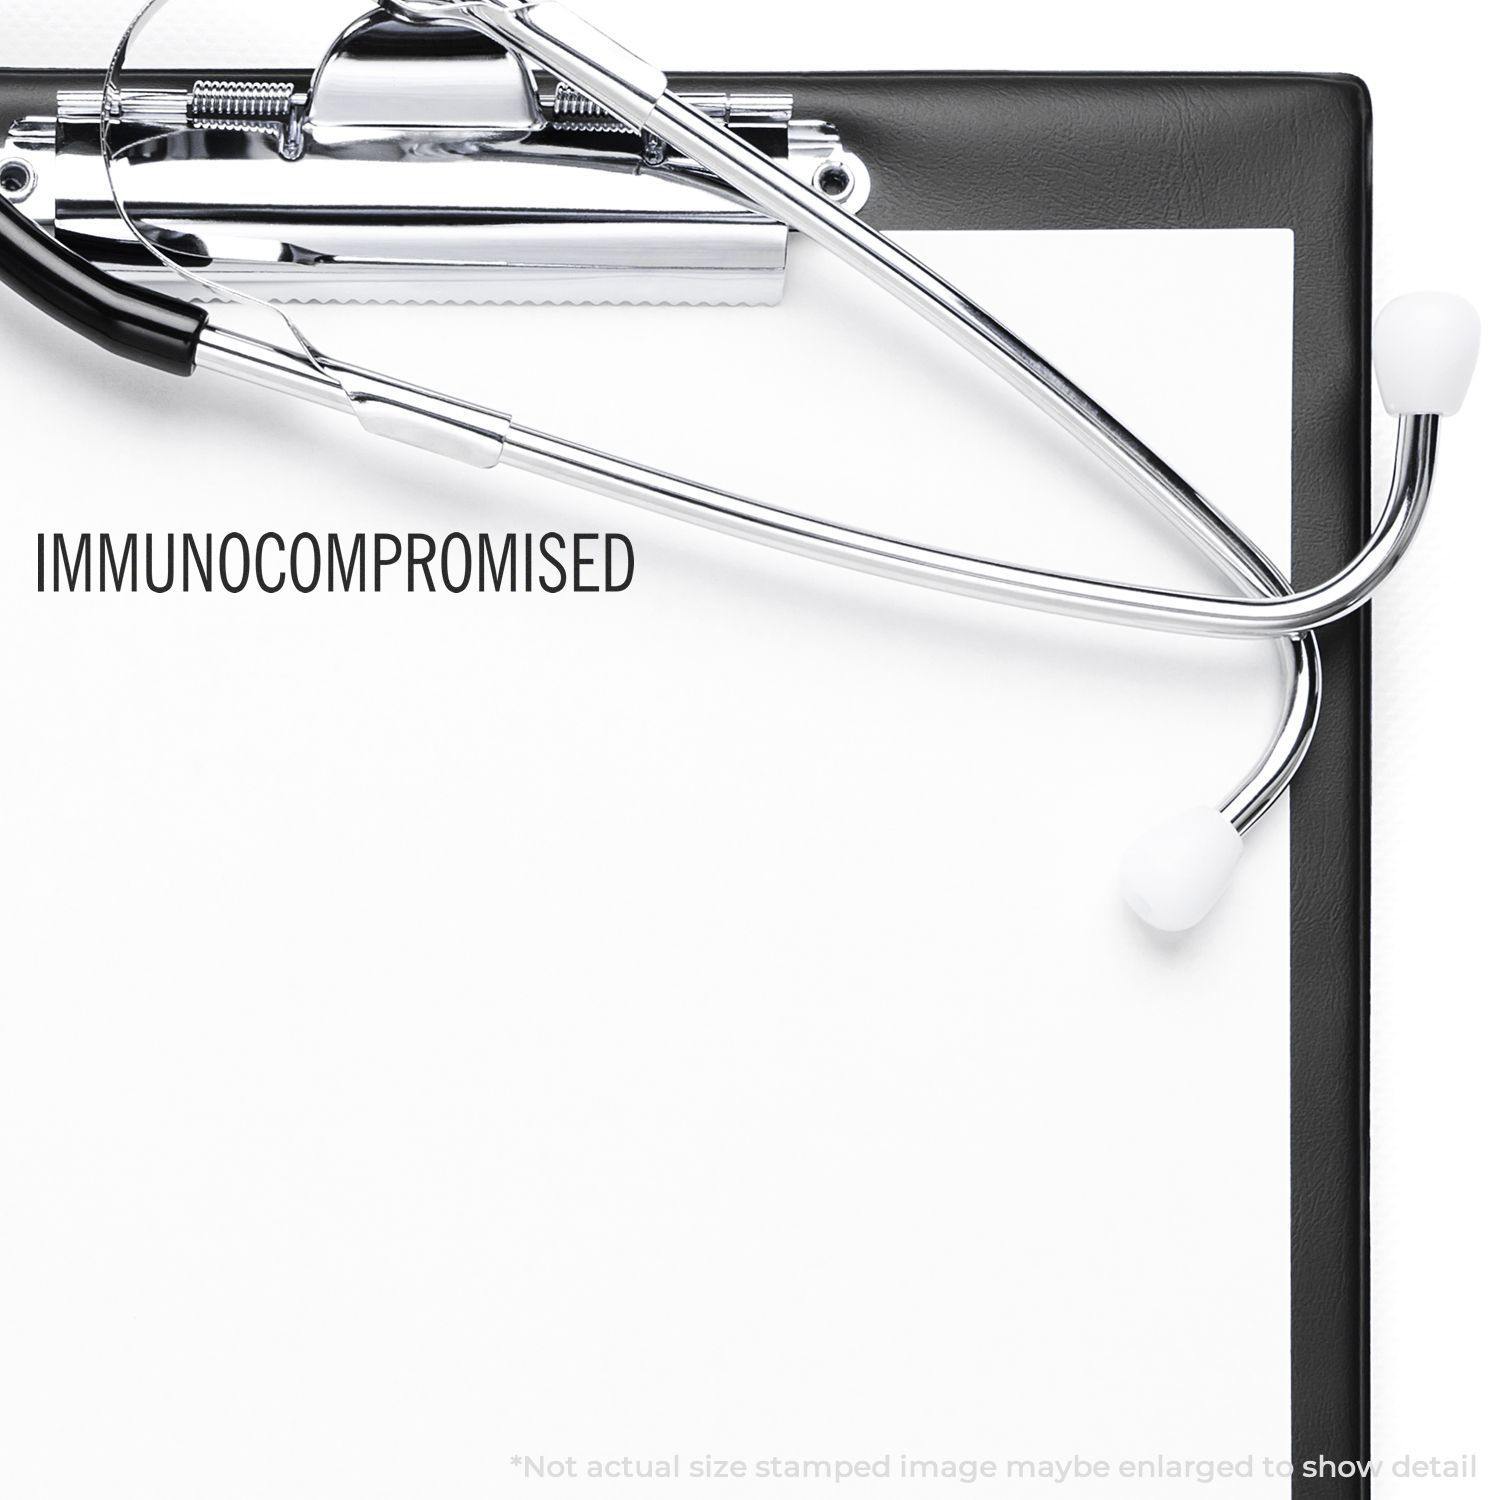 A self-inking stamp with a stamped image showing how the text "IMMUNOCOMPROMISED" in a large font is displayed by it after stamping.